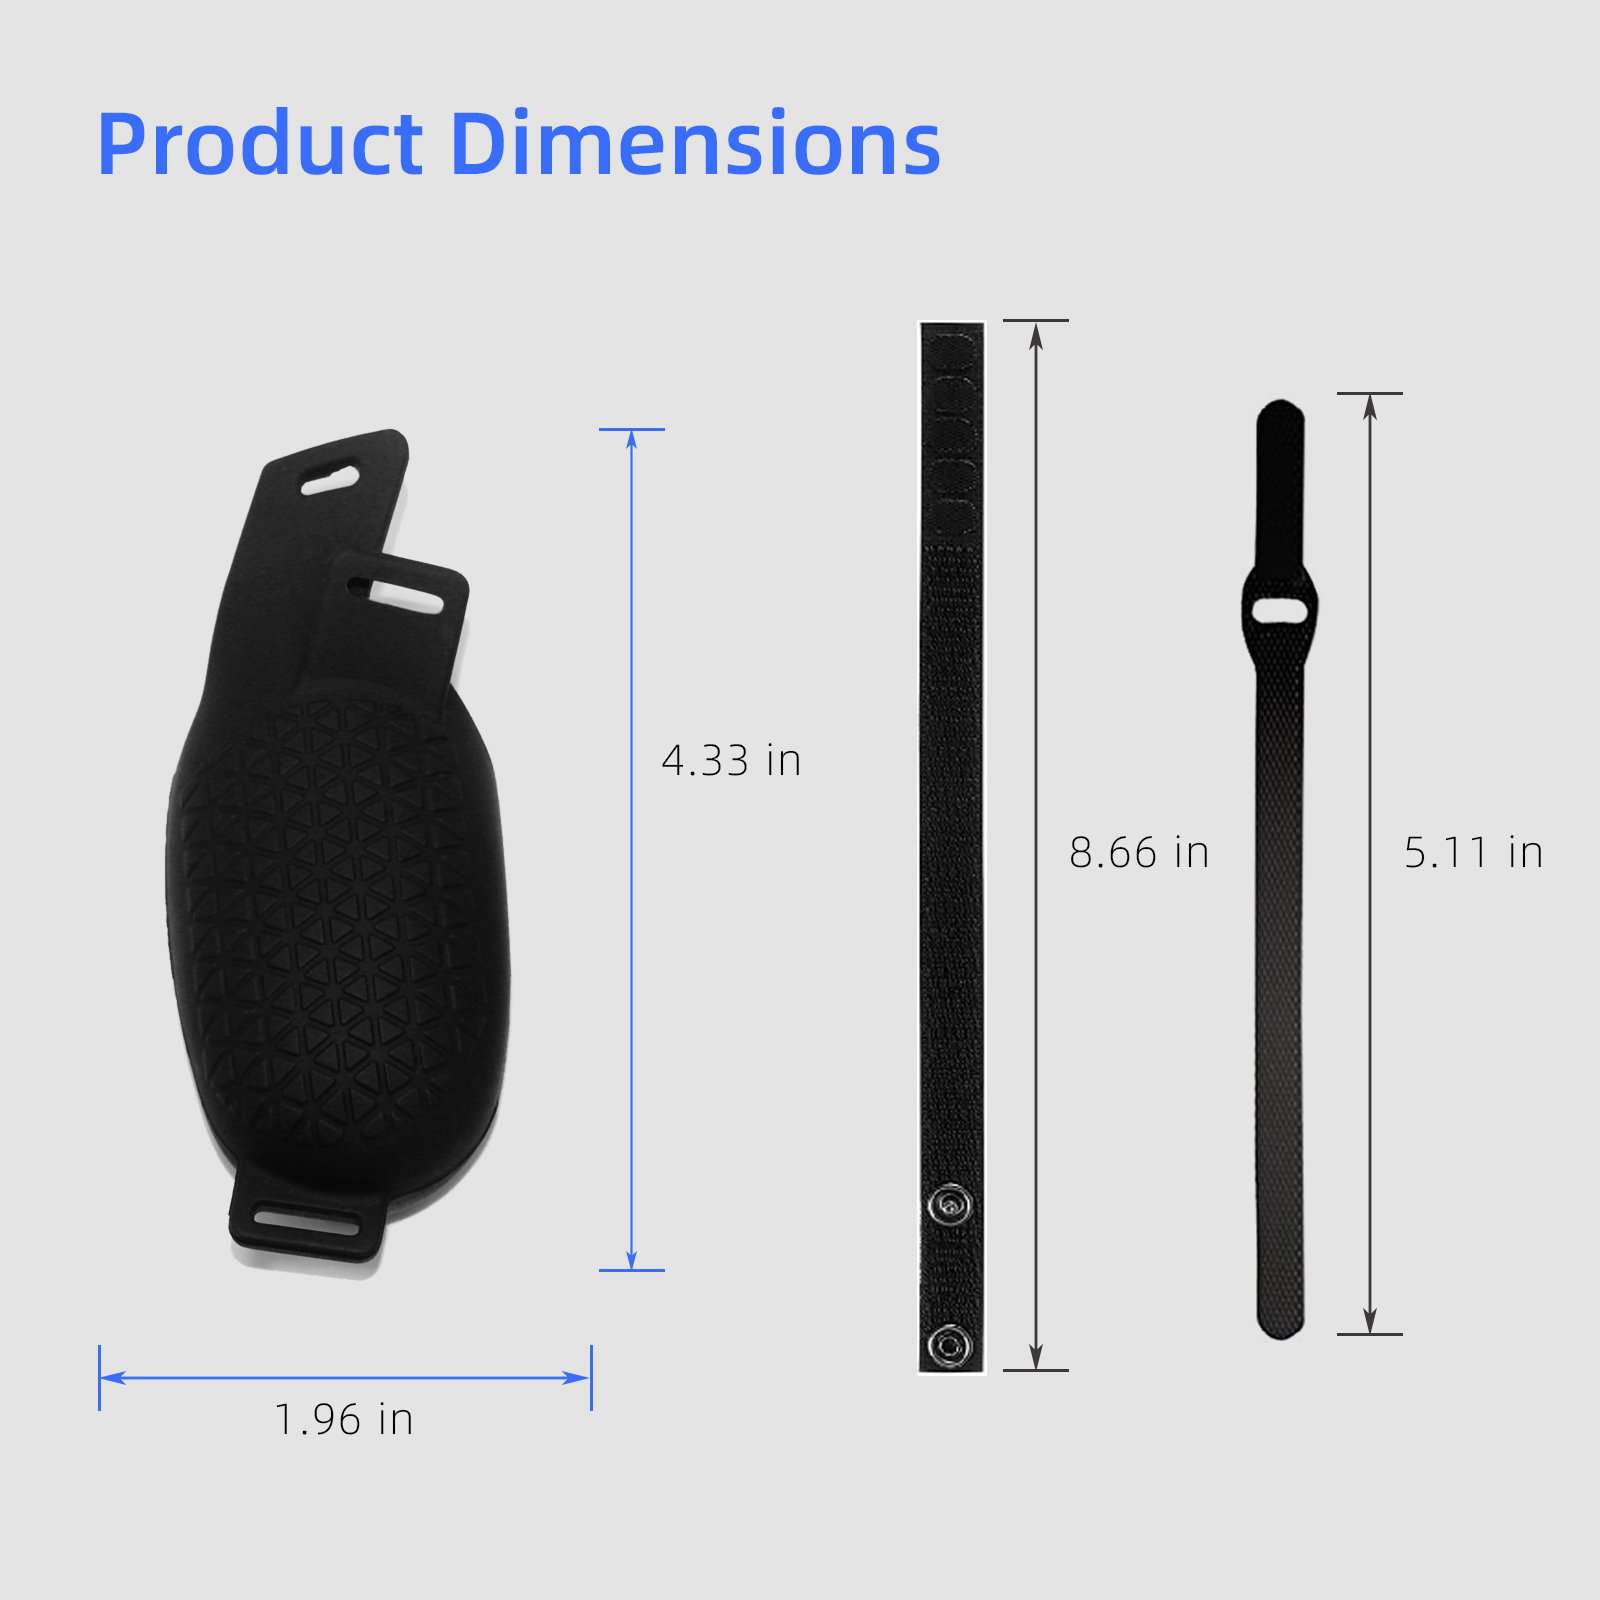 The silicone cover dimensions are 4.33 inches in length and 1.96 inches in width.